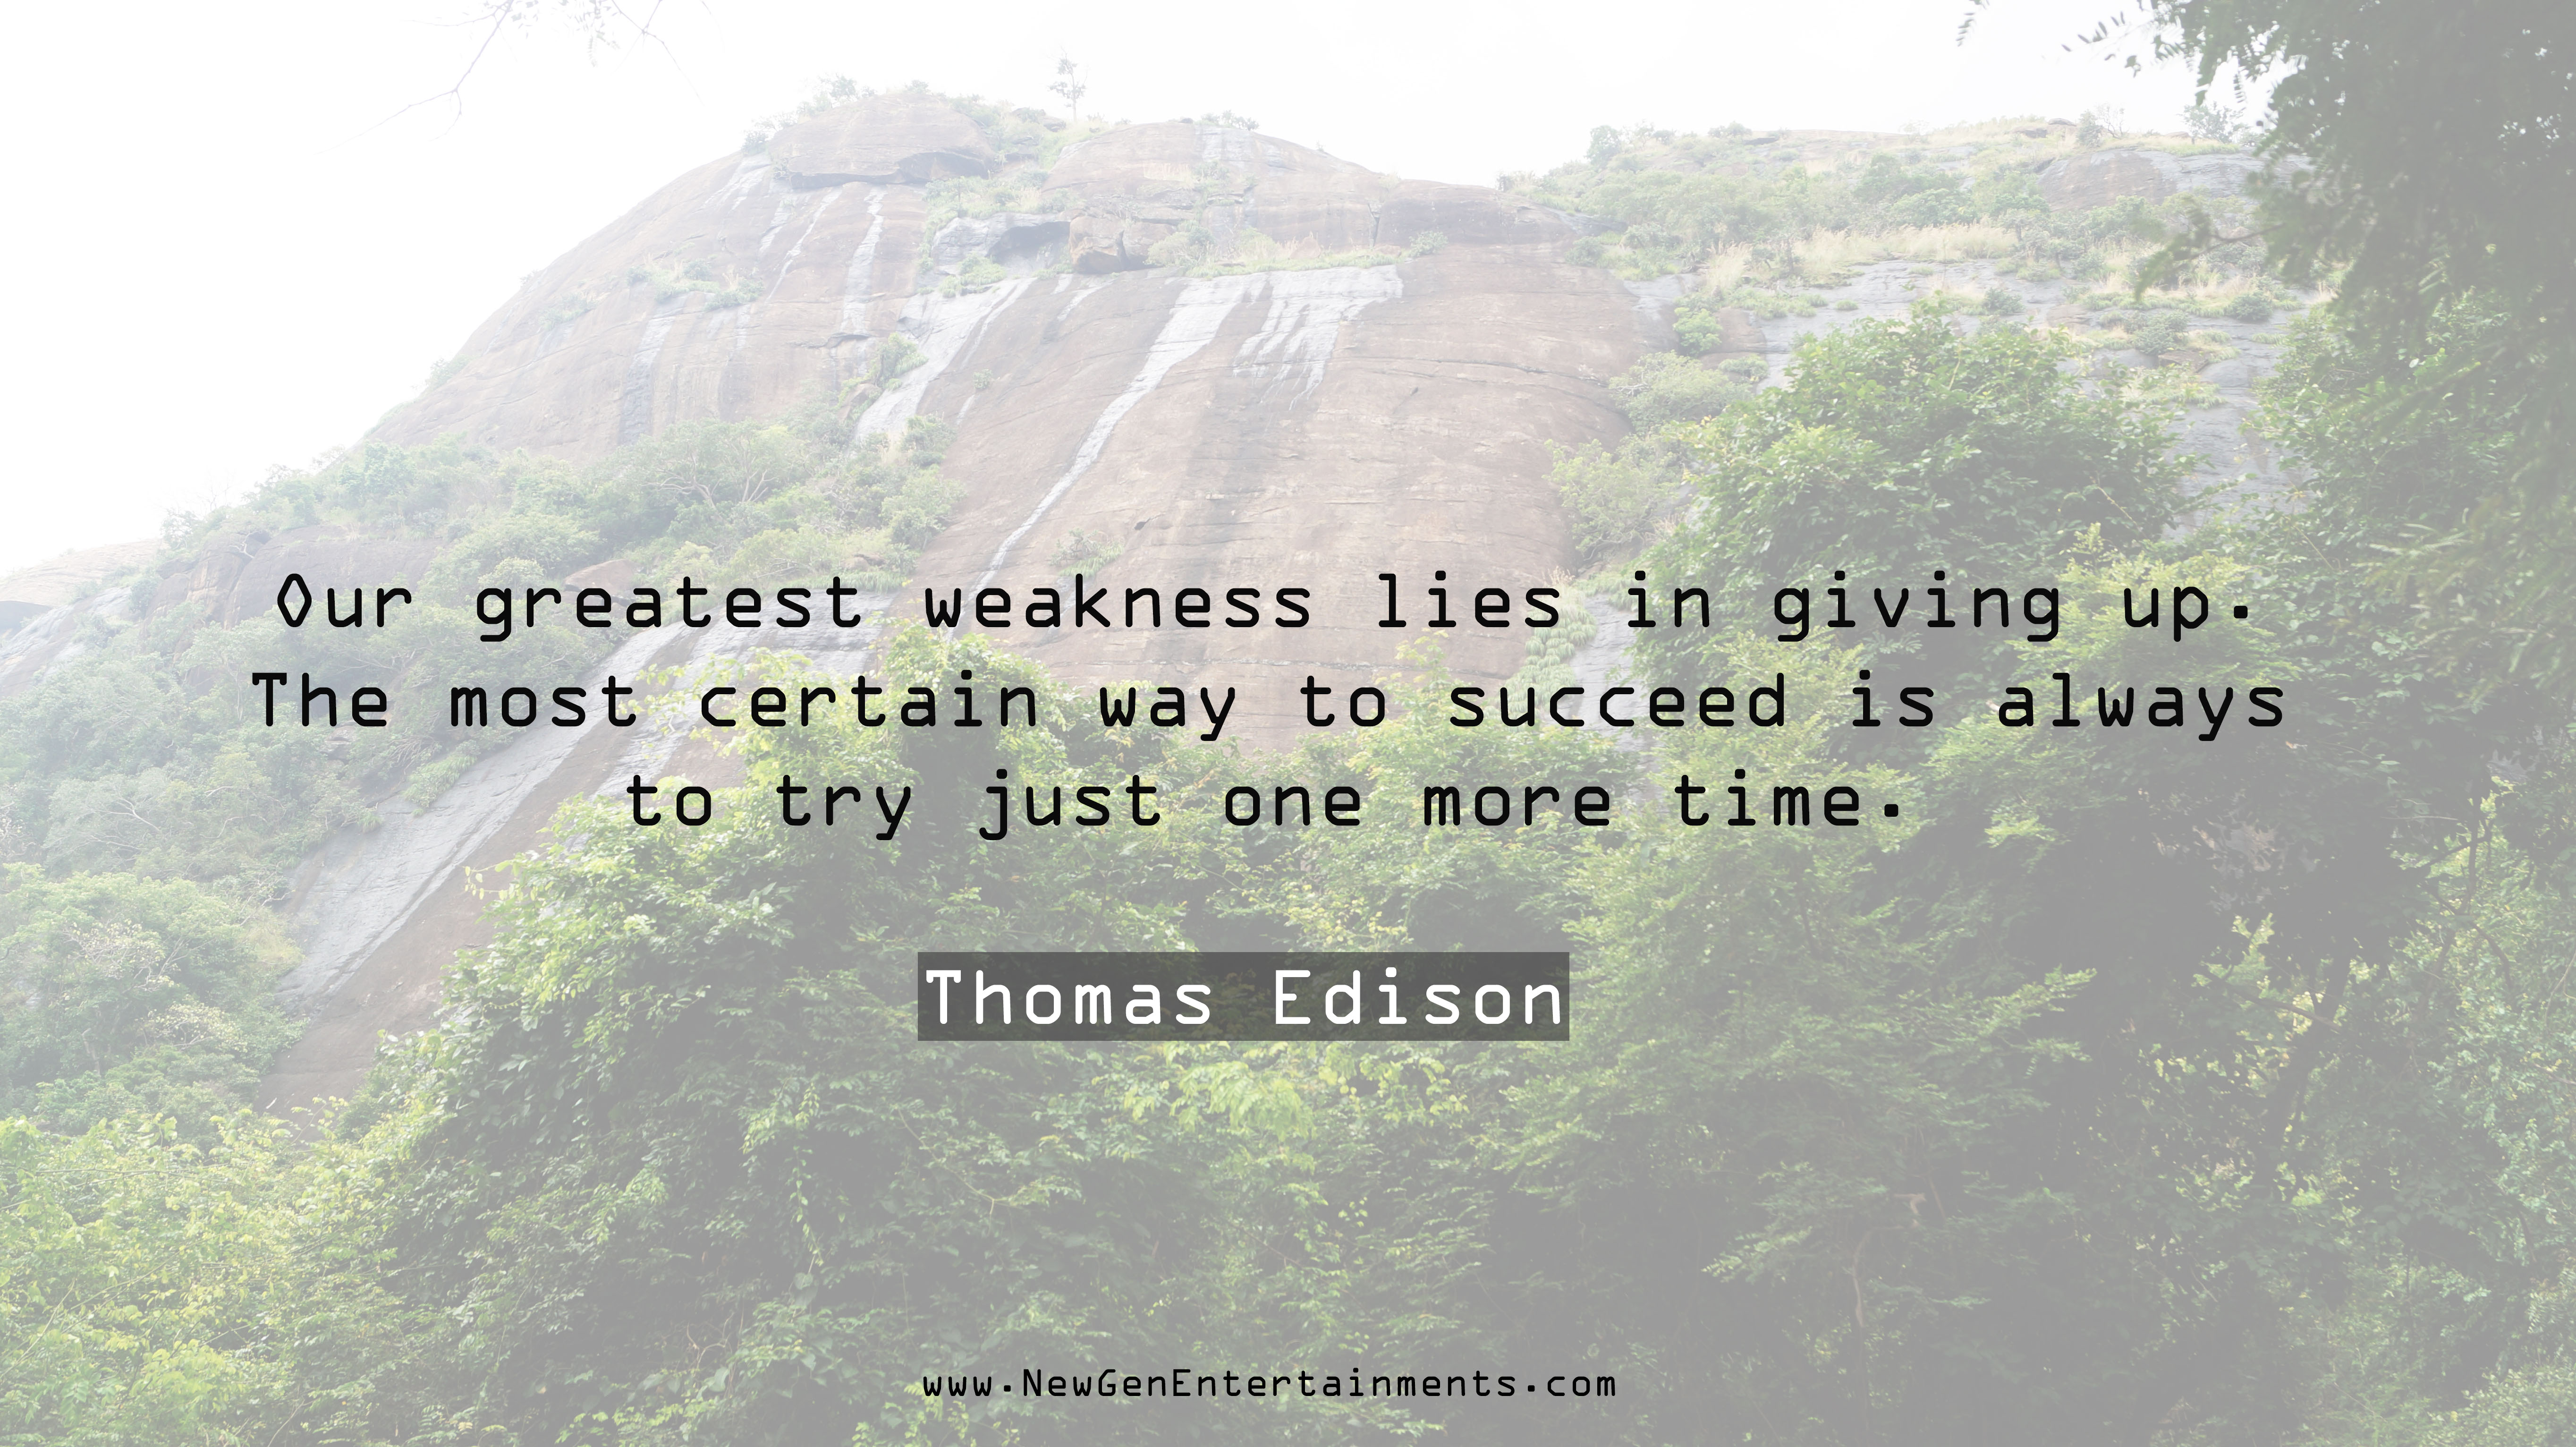 Our greatest weakness lies in giving up